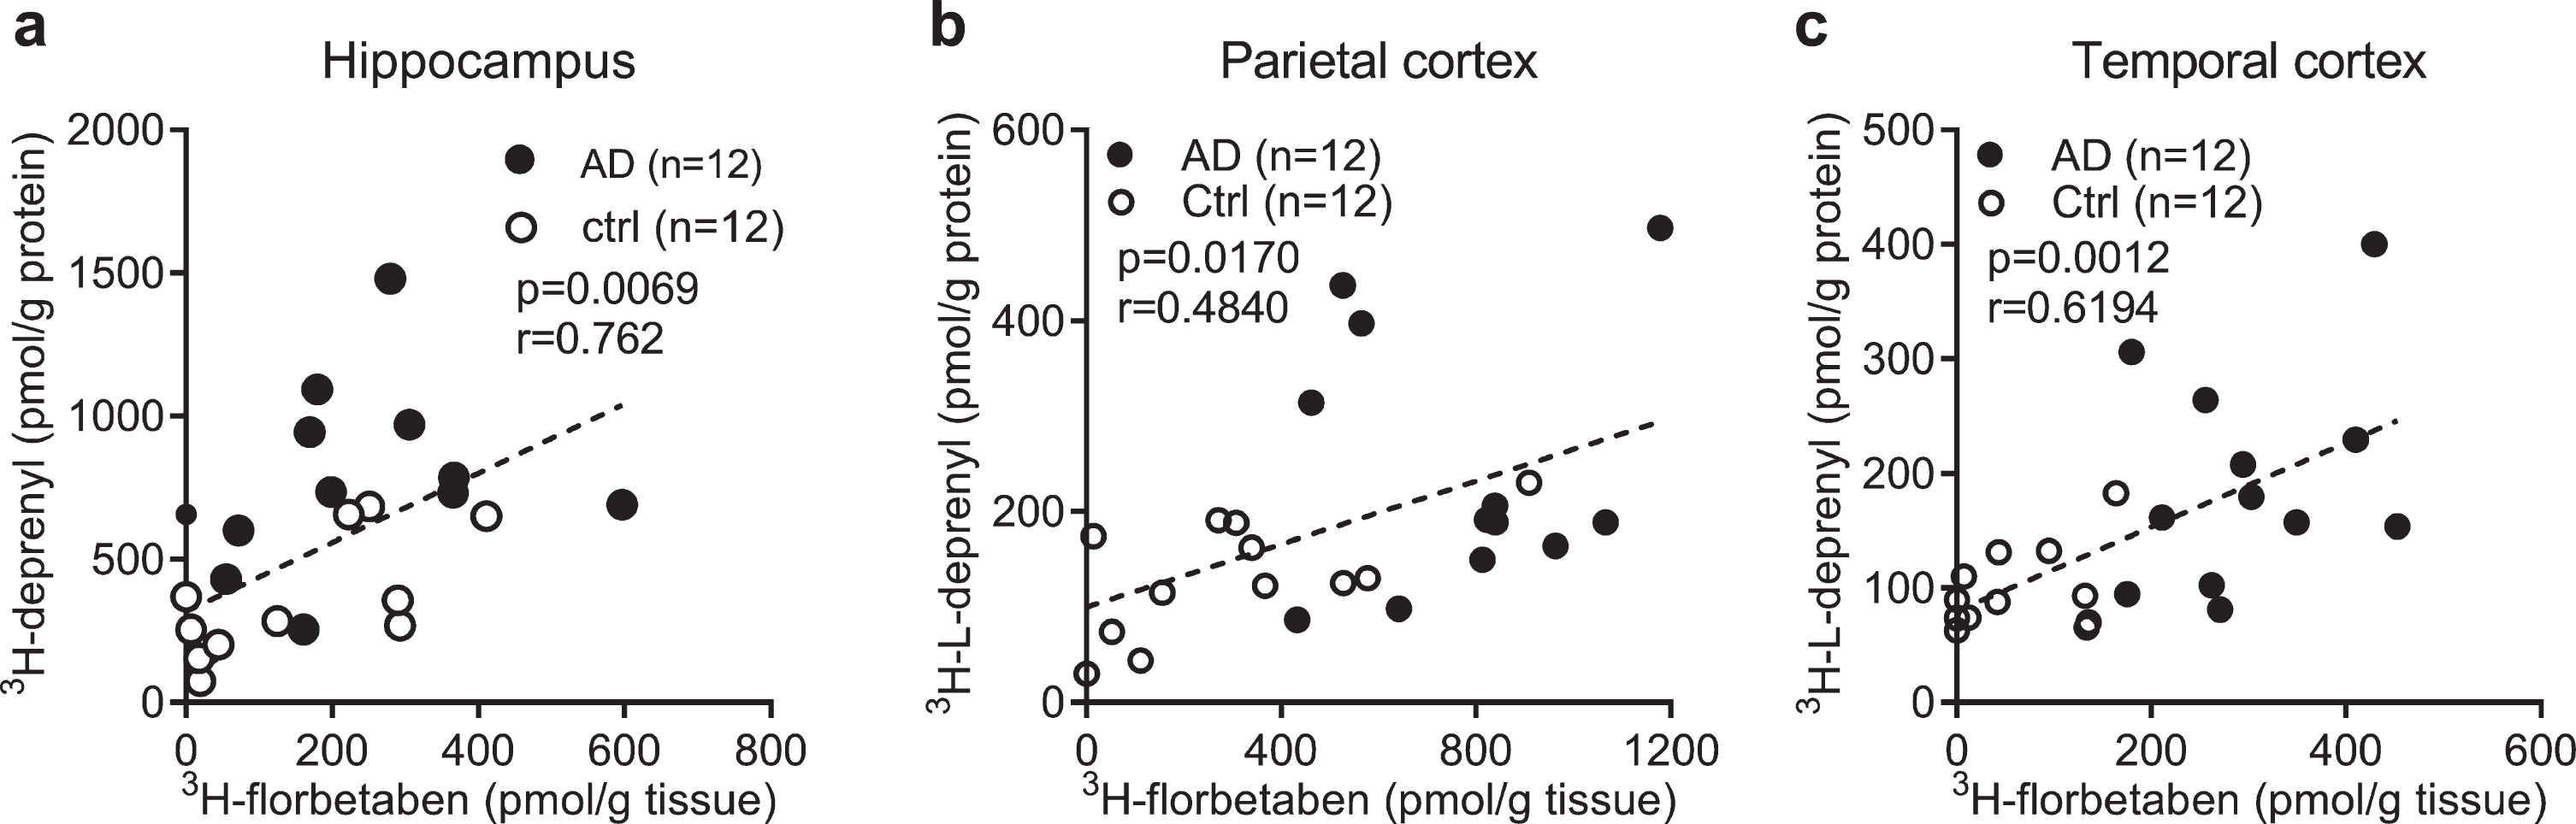 Correlation between regional 3H-florbetaben, 3H-L-deprenyl binding and level of GFAP expression in AD and control brain. a-c) Correlation between 3H-L-deprenyl (6 nM) and 3H-florbetaben (5 nM) binding in the hippocampus, parietal and temporal cortex of AD and control cases.